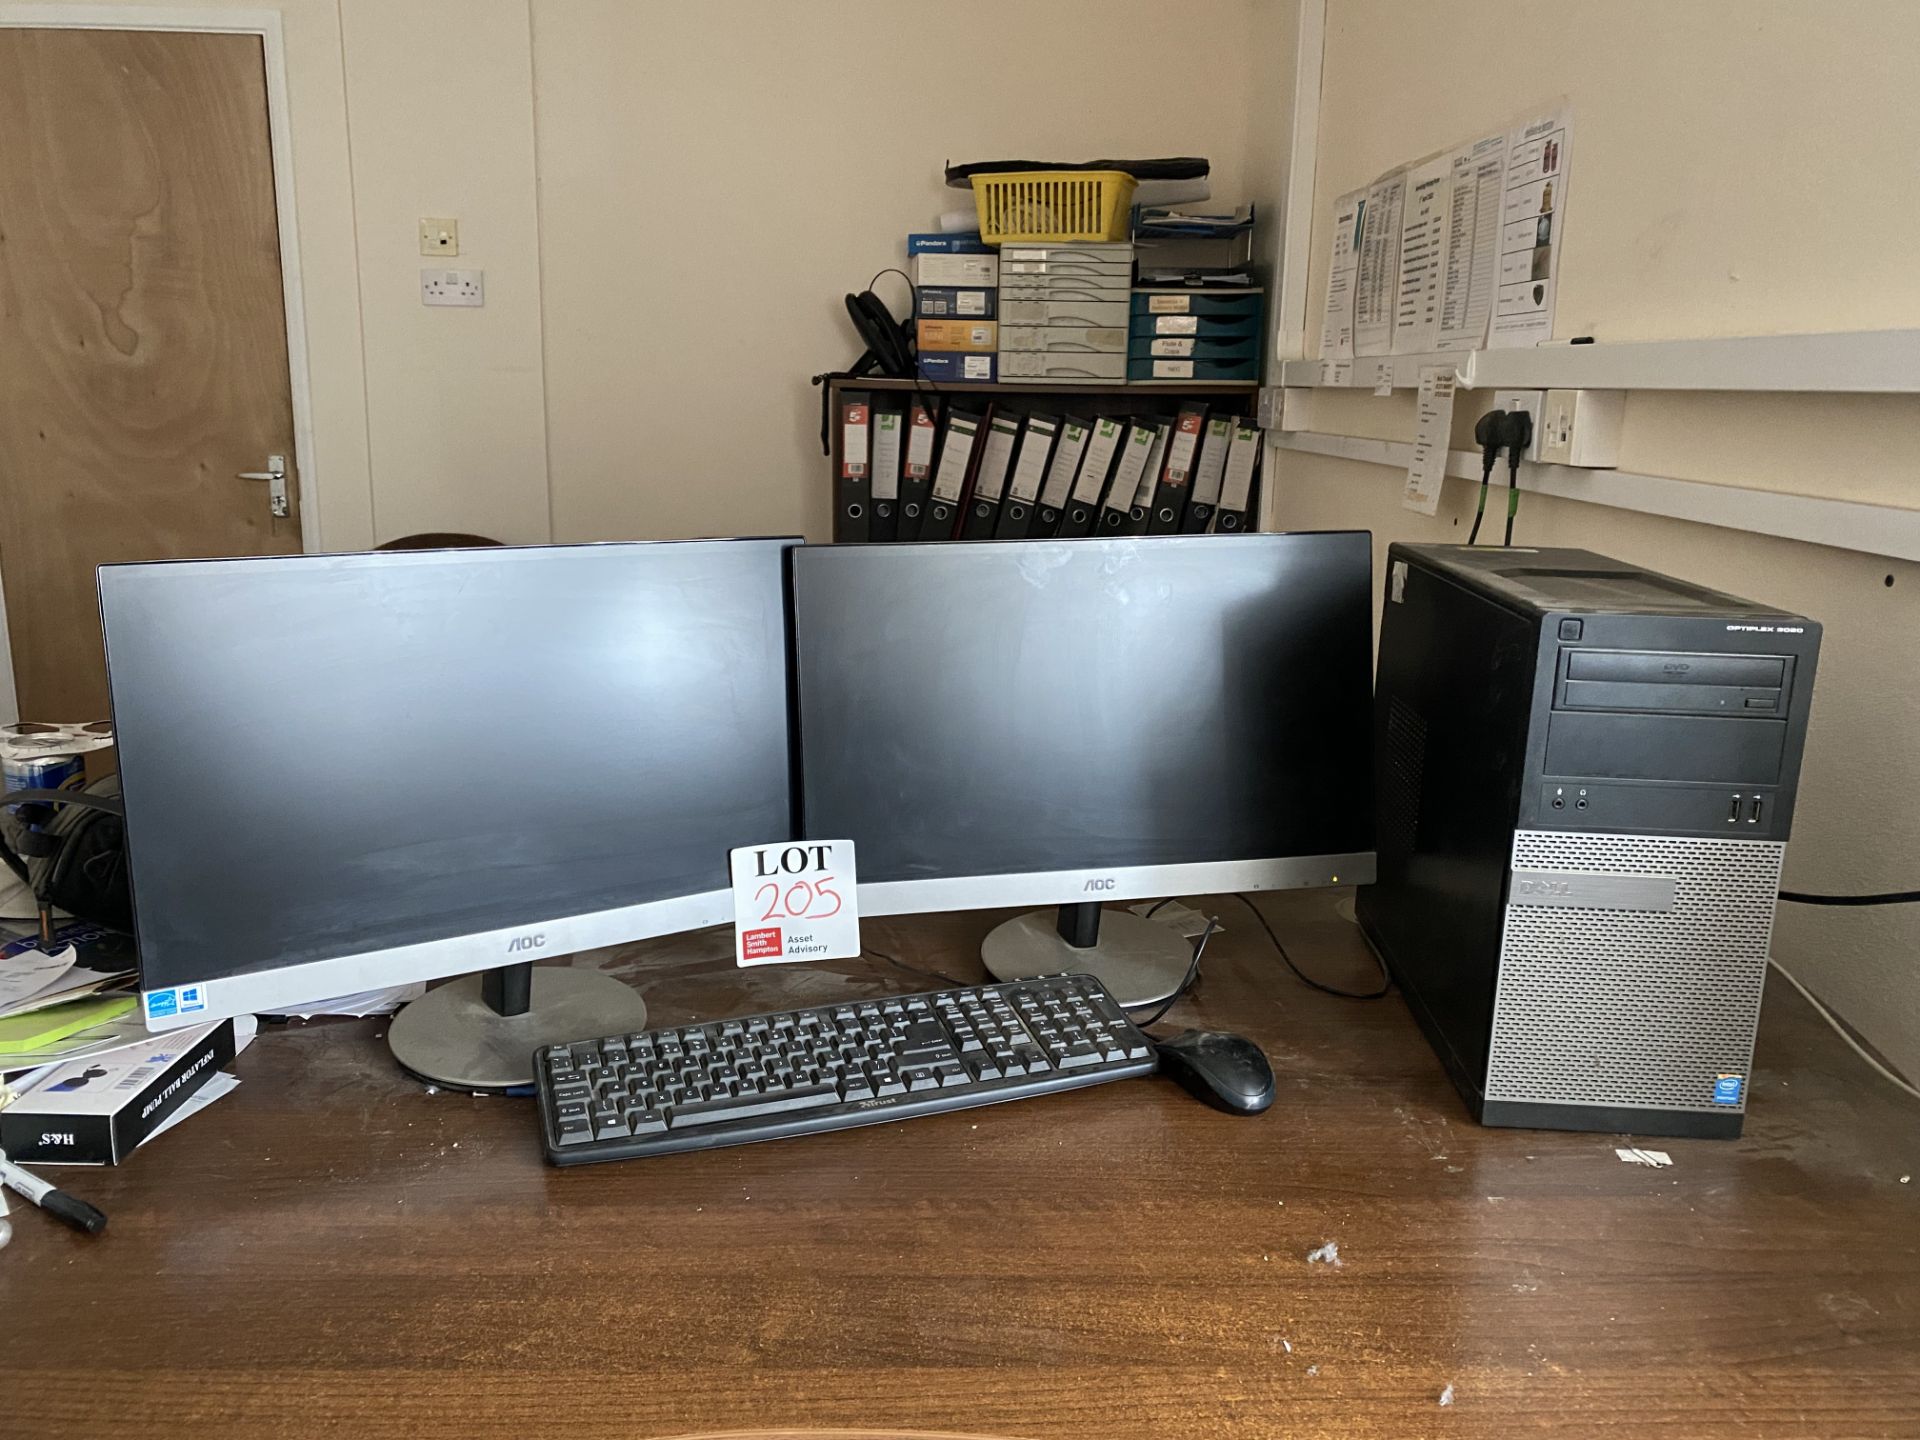 Two AOC desktop monitors, one Dell Optiplex 3020 computer with keyboard & mouse